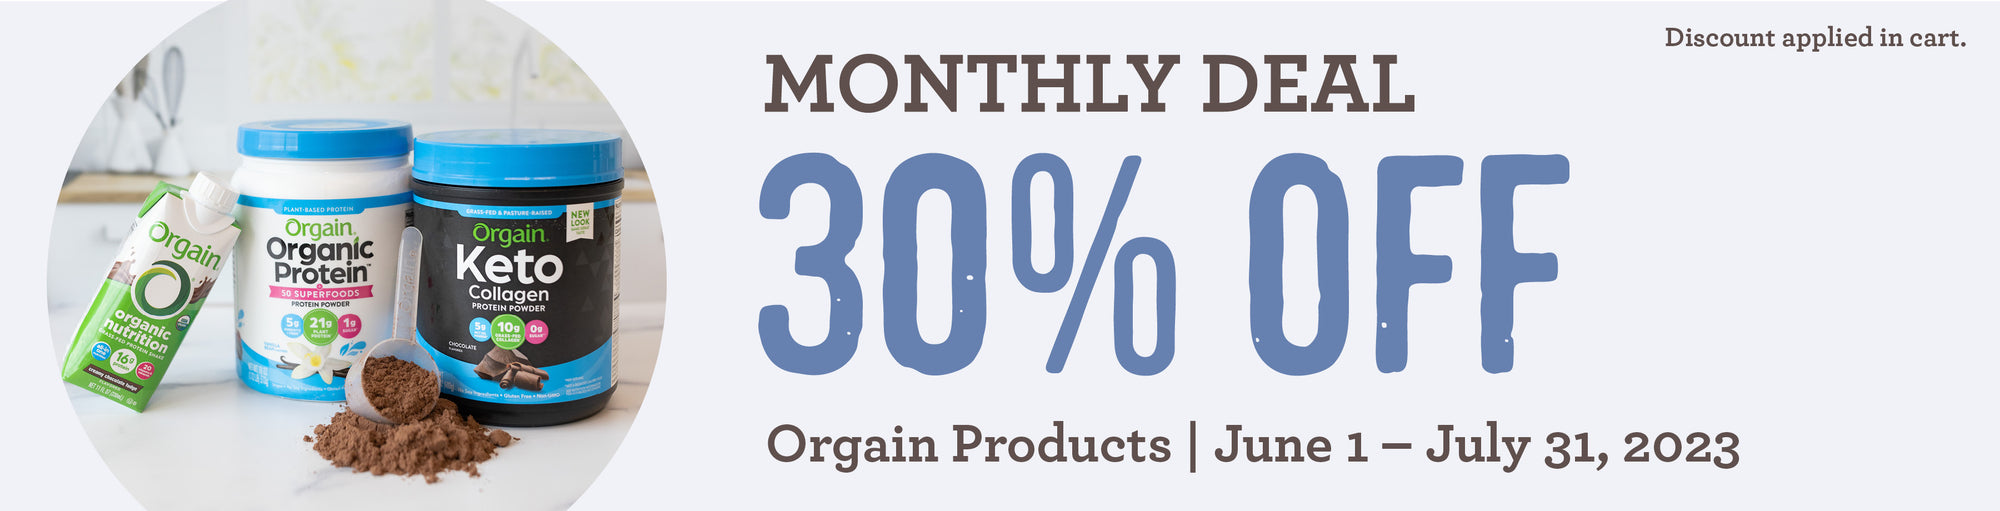 30% OFF Orgain product all through July!